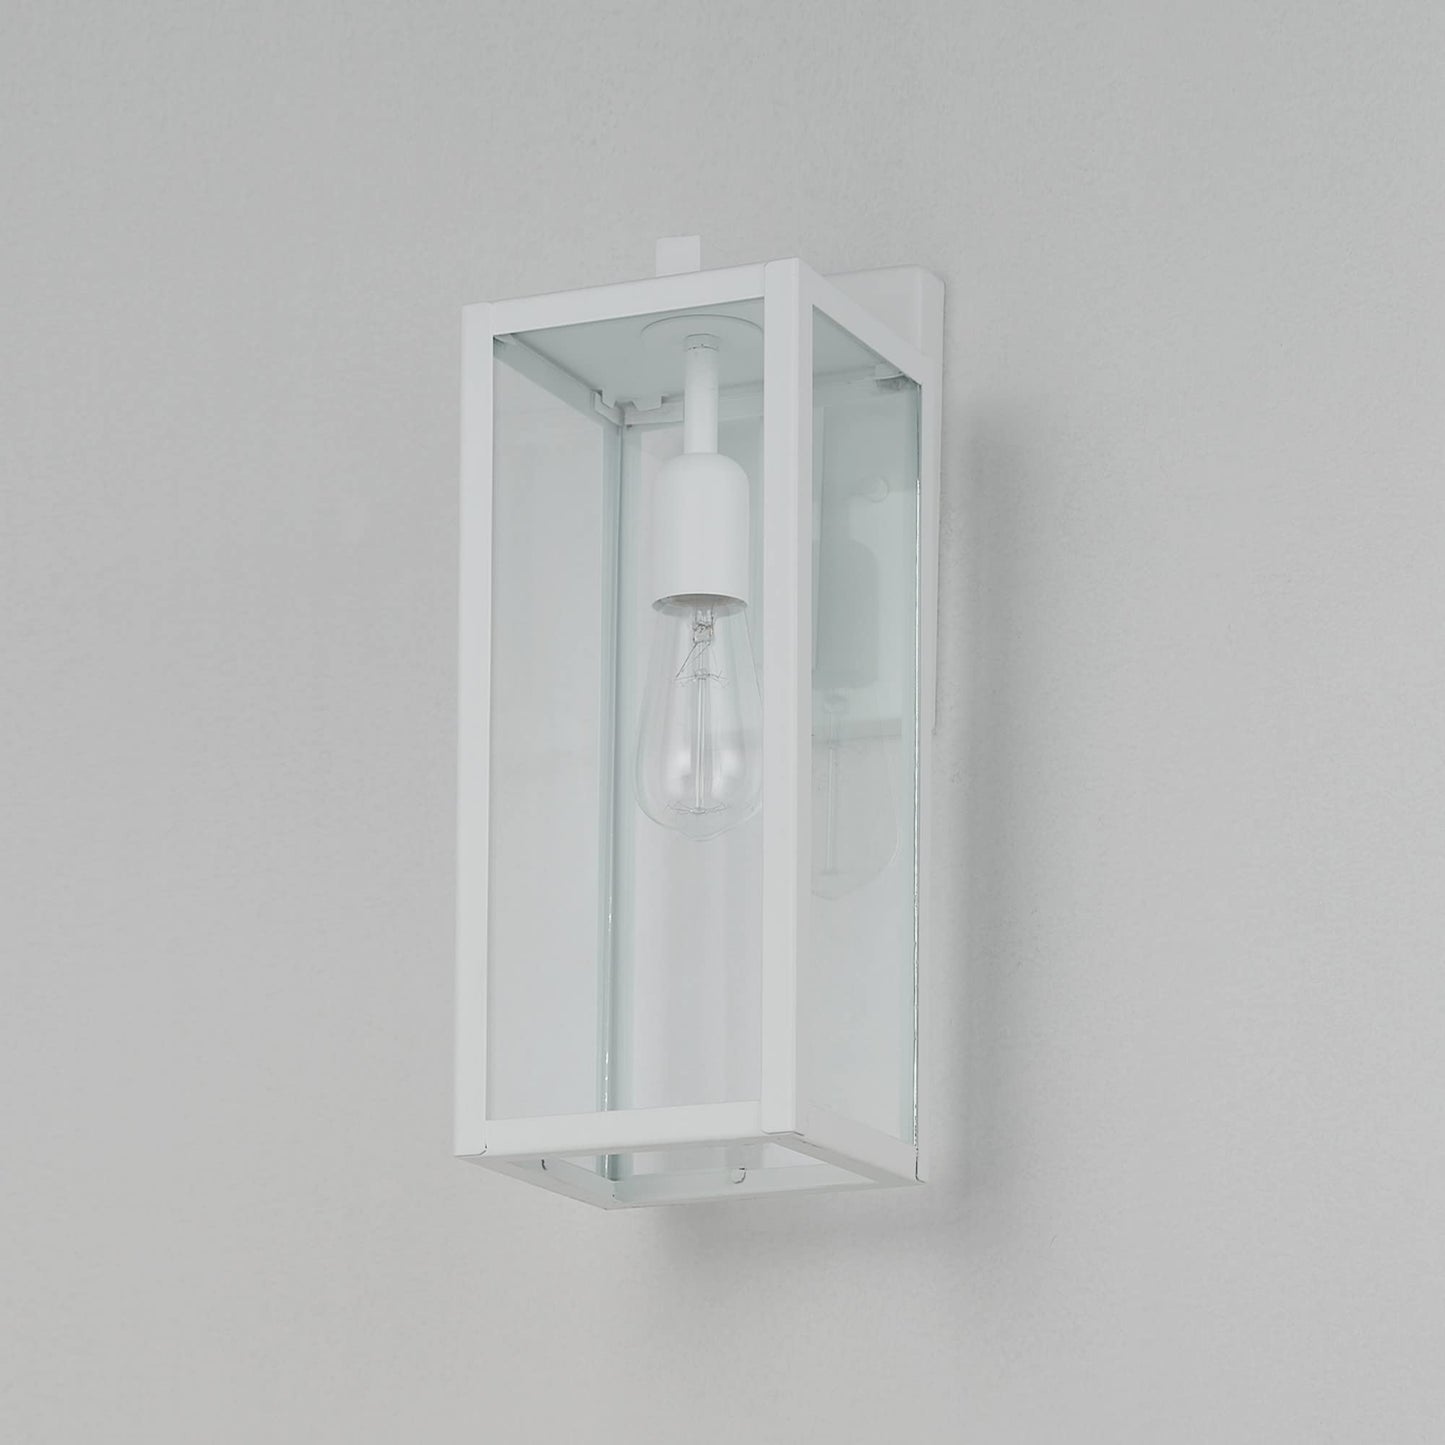 Globe Electric 44836 Bowery 1-Light Outdoor Indoor Wall Sconce, Matte White, Clear Glass Shade